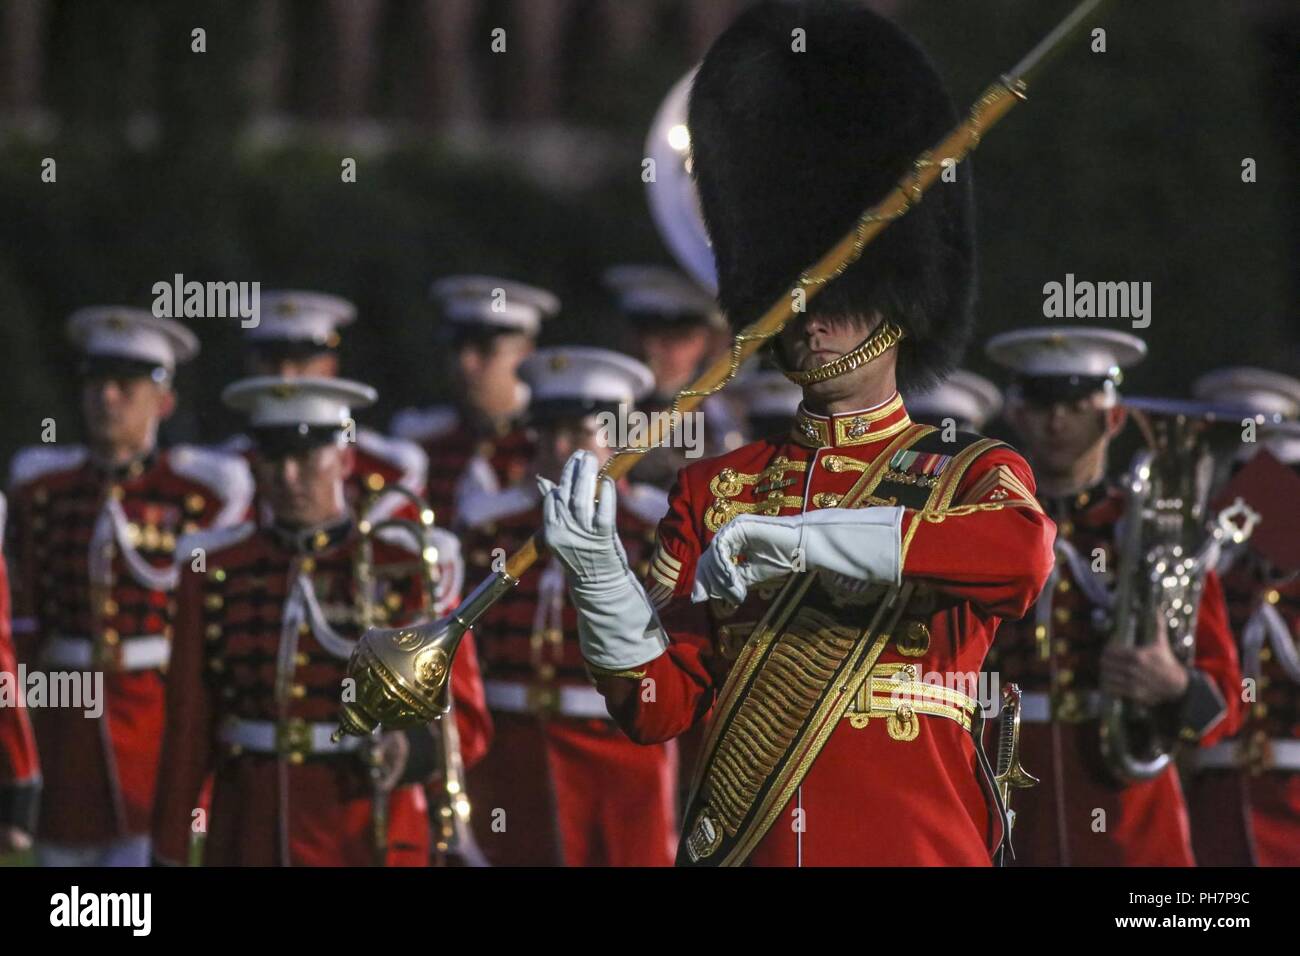 Marines with "The Presidents Own" United States Marine Band march to their positions during a Friday Evening Parade at Marine Barracks Washington D.C., June 29, 2018. The guest of honor for the ceremony was the Under Secretary of the Navy, Thomas B. Modly, and the hosting official was the Assistant Commandant of the Marine Corps, Gen. Glenn M. Walters. Stock Photo